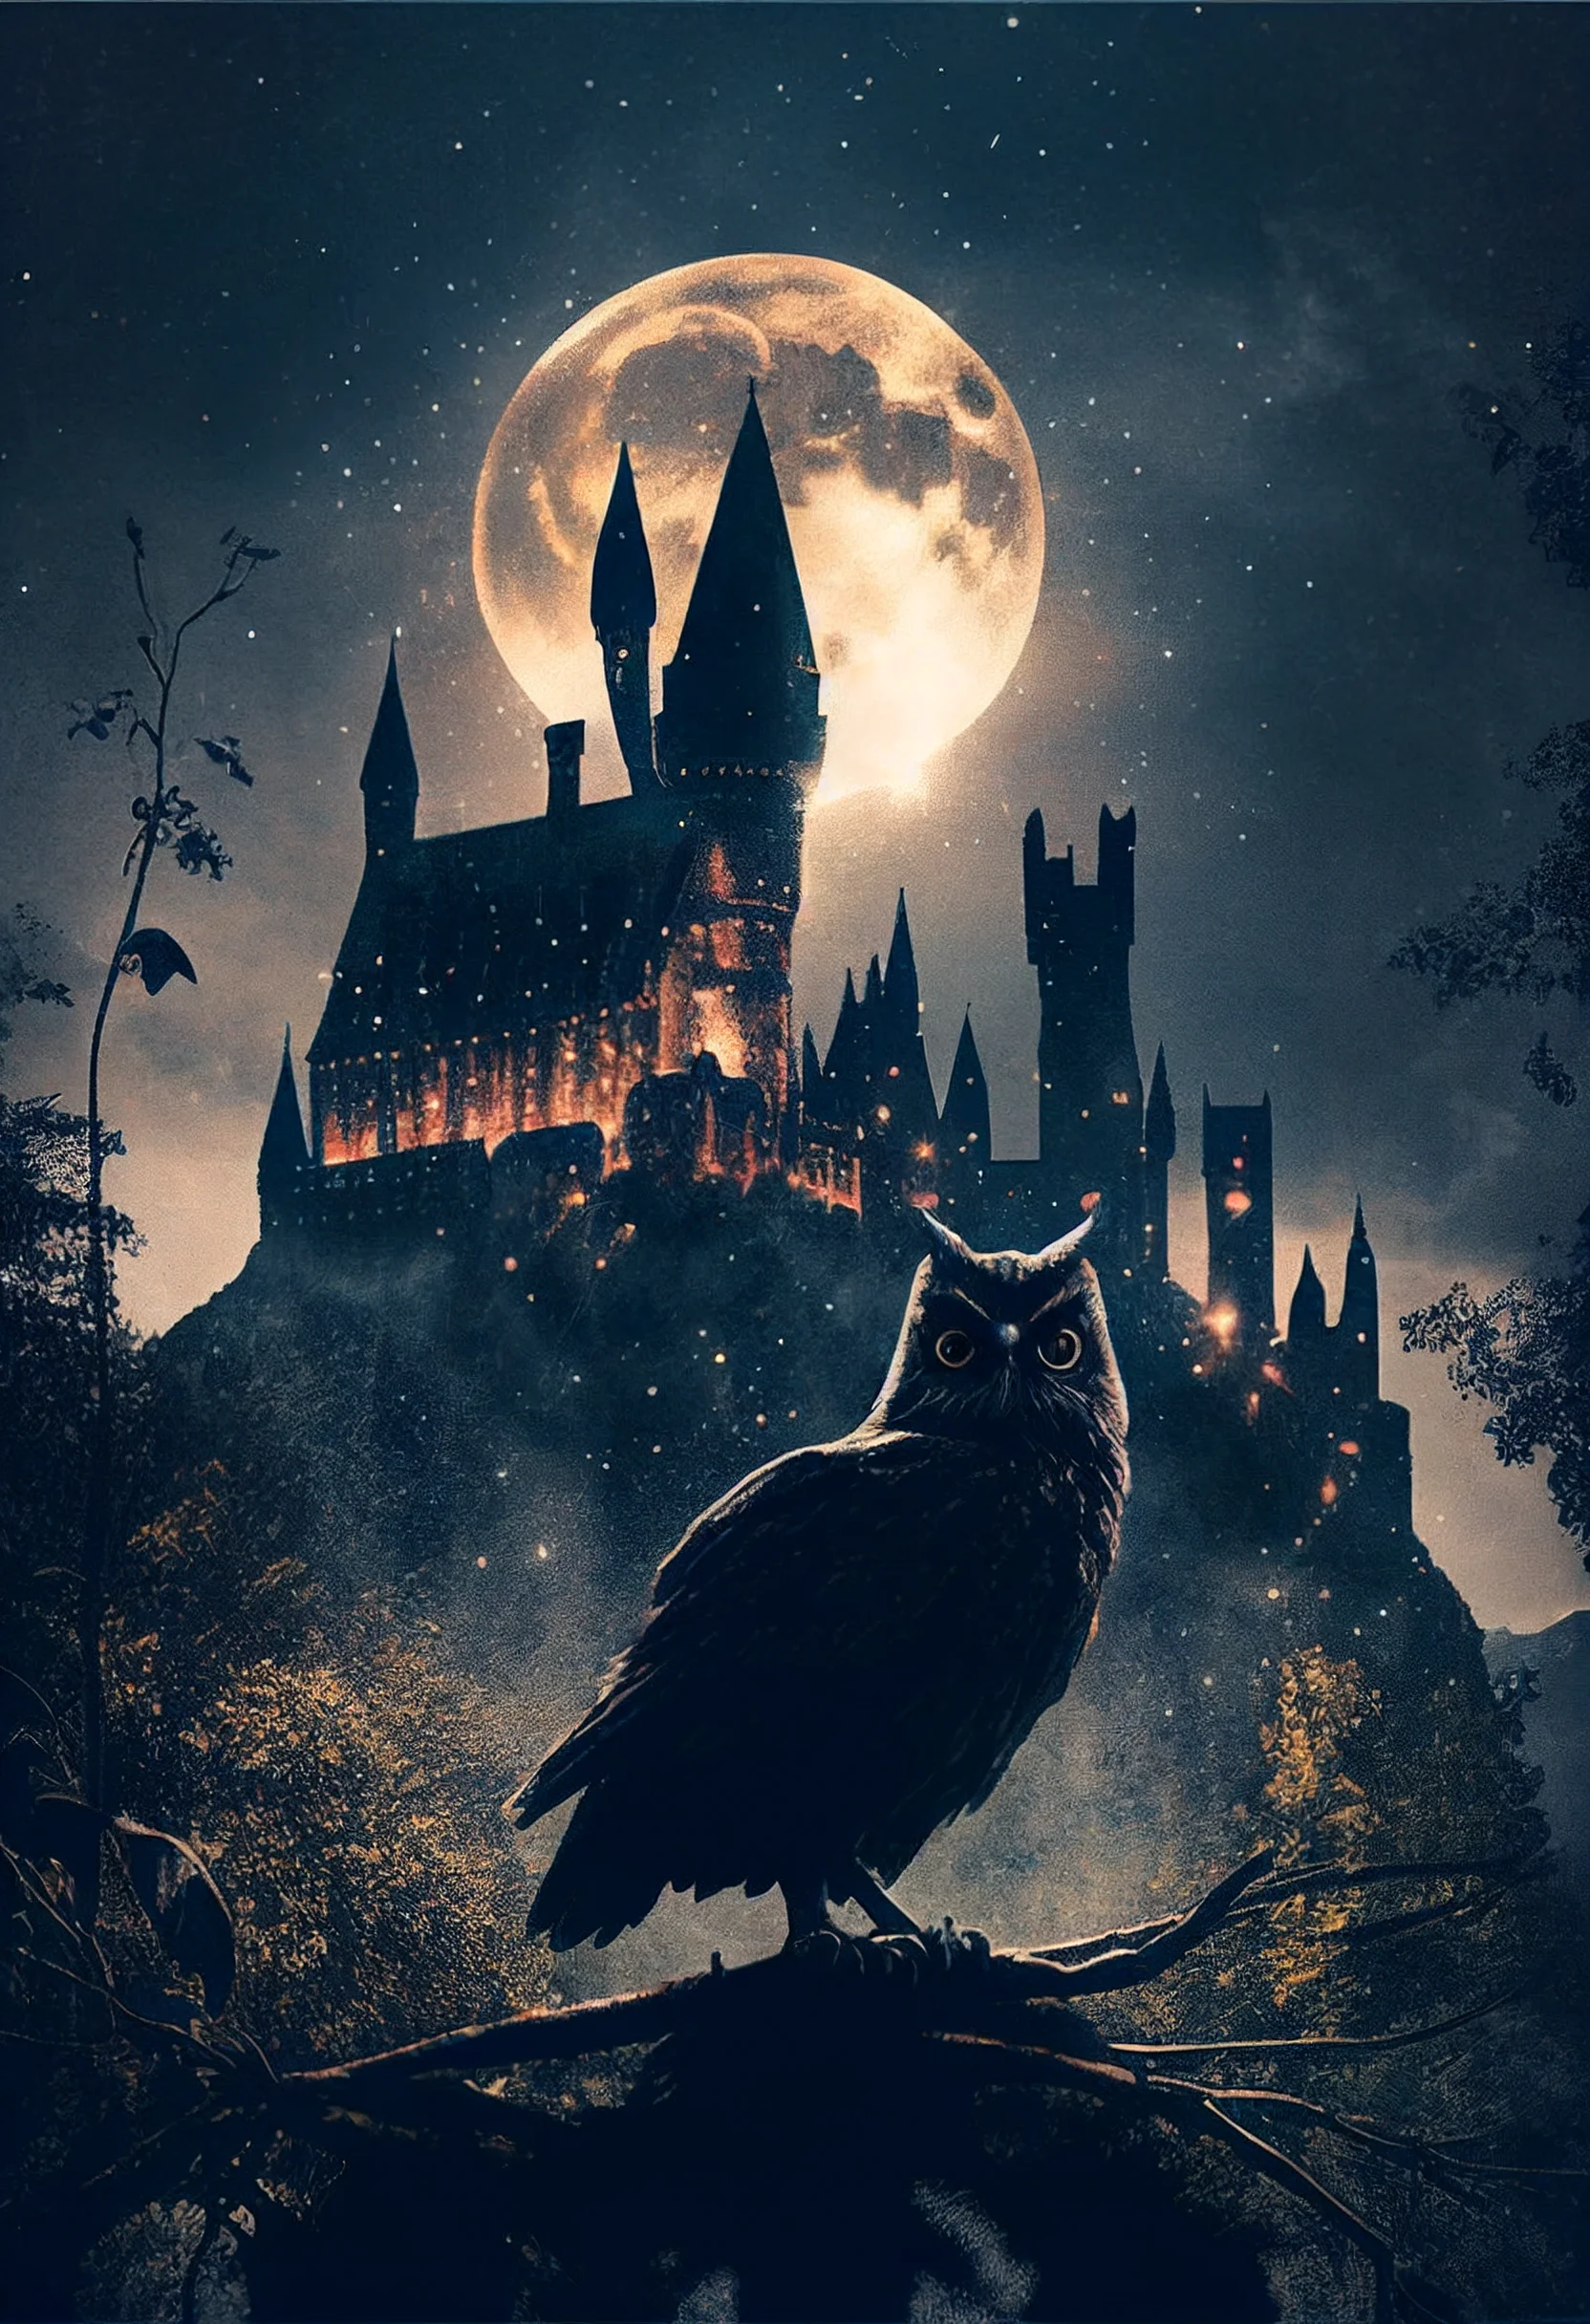 An owl sitting on a tree branch with Hogwarts castle in the background - Hogwarts